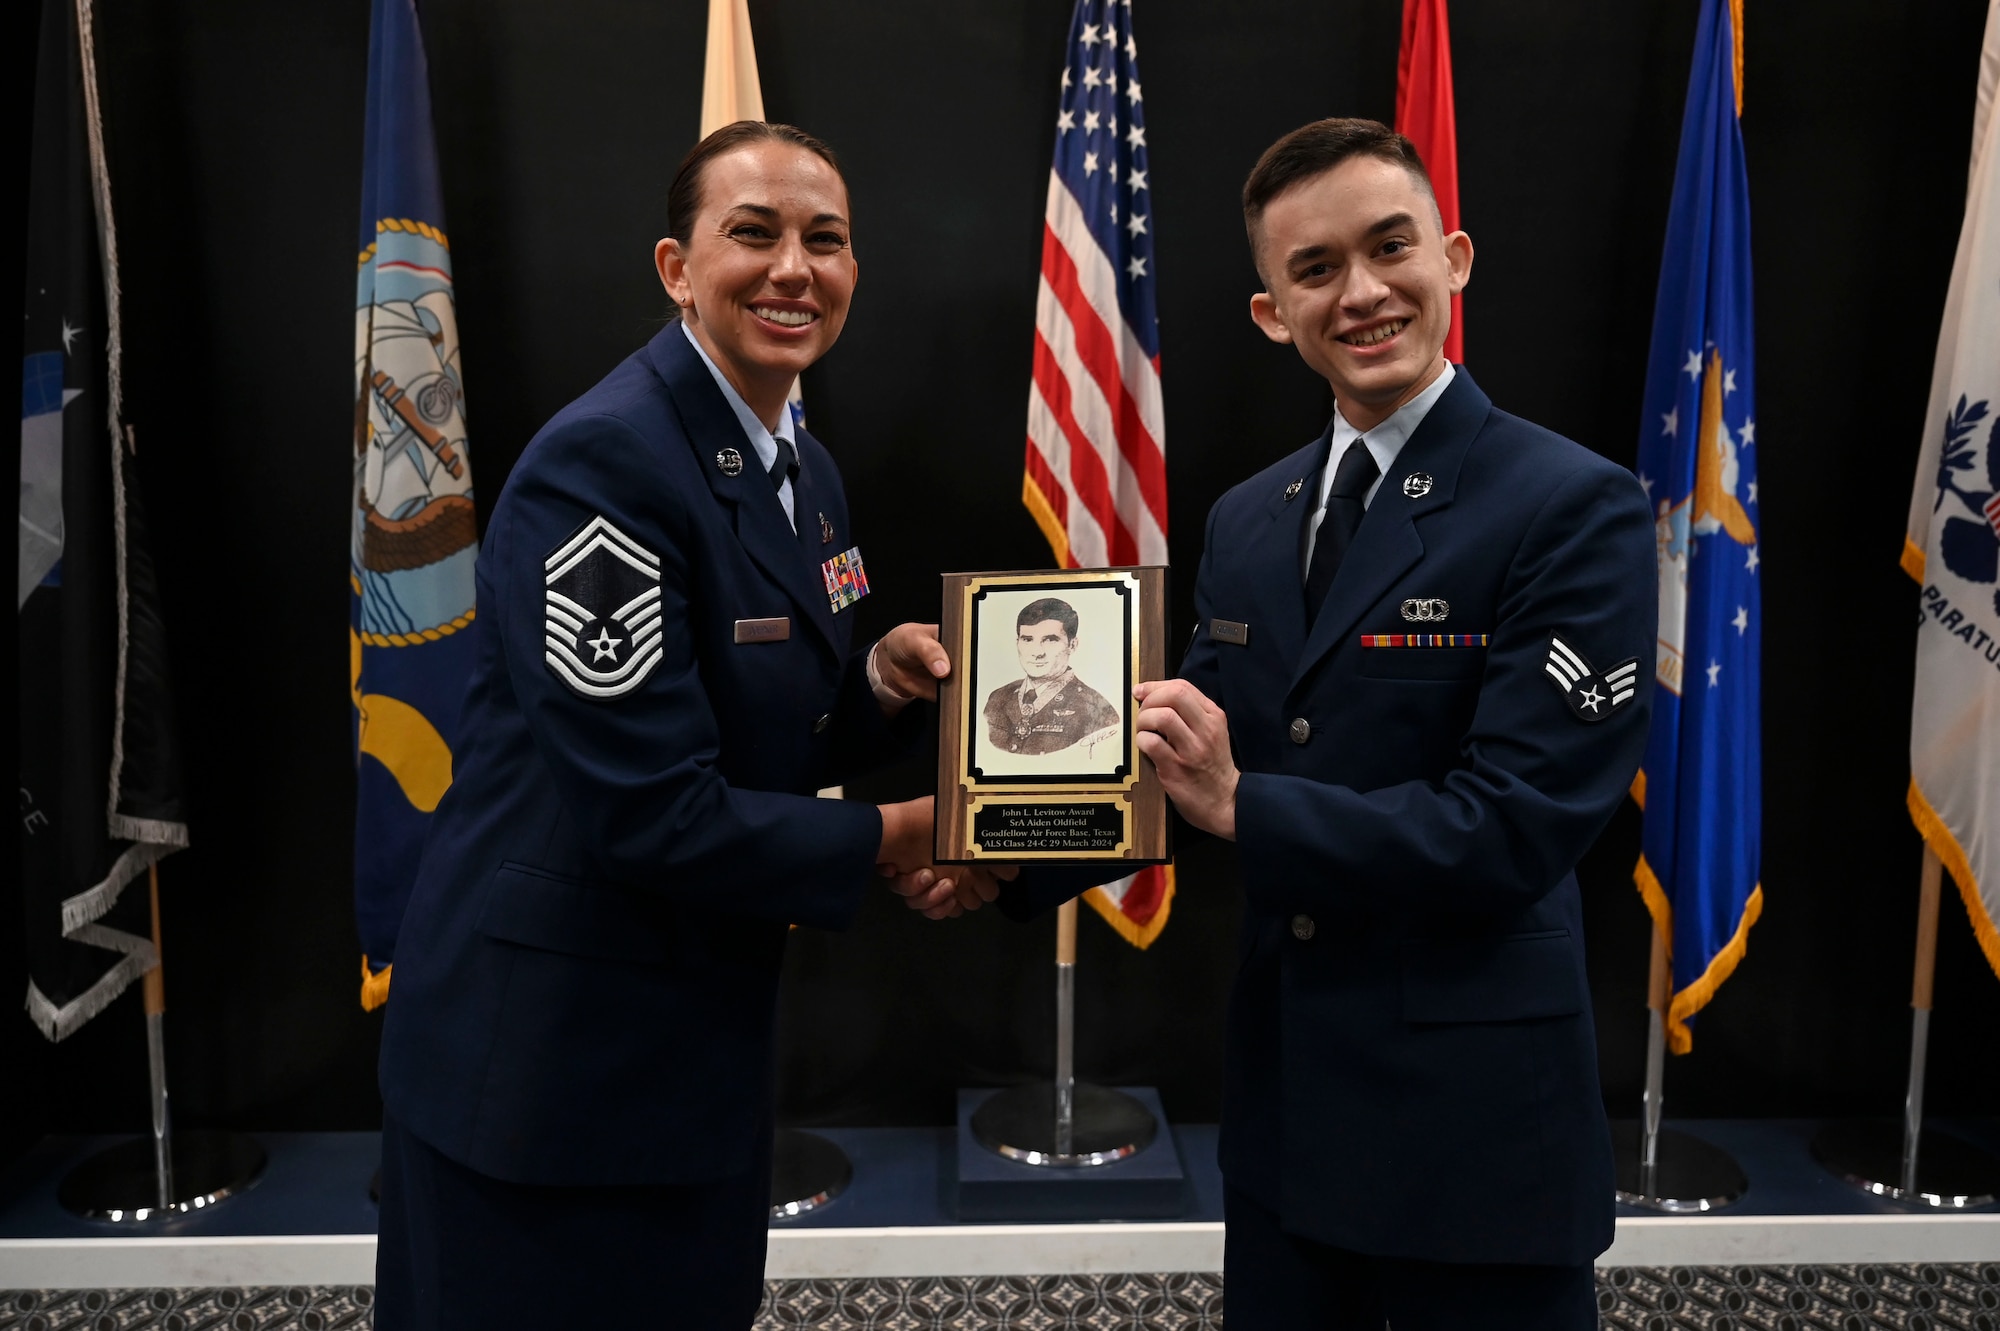 U.S. Air Force Senior Airman Aden Oldfield, 47th Operations Support Squadron, is presented the John L. Levitow Award by Senior Master Sgt. Crystal Doepker, 17th Comptroller and Wing Staff Agencies senior enlisted leader. ALS is a five-week course designed to prepare senior airmen to assume supervisory duties through instruction in leadership, followership, written and oral communication skills, and the profession of arms. (U.S. Air Force photo by Airman 1st Class Madison Collier)